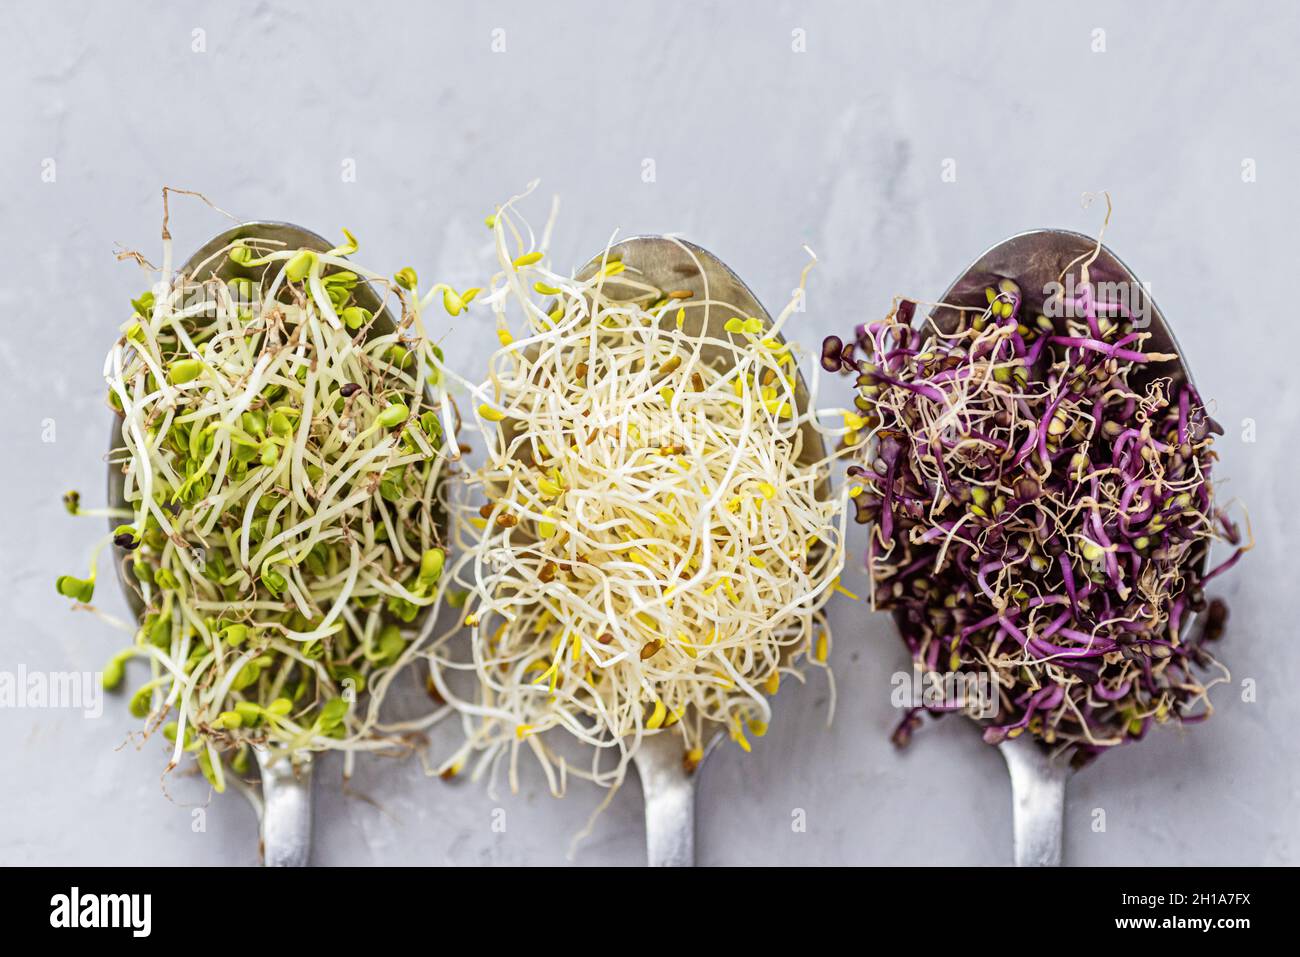 Flat lay top view of microgreens assortment on gray concrete background. Fresh alfalfa sprouts, broccoli flower buds, coral buds, mixed garnish Stock Photo